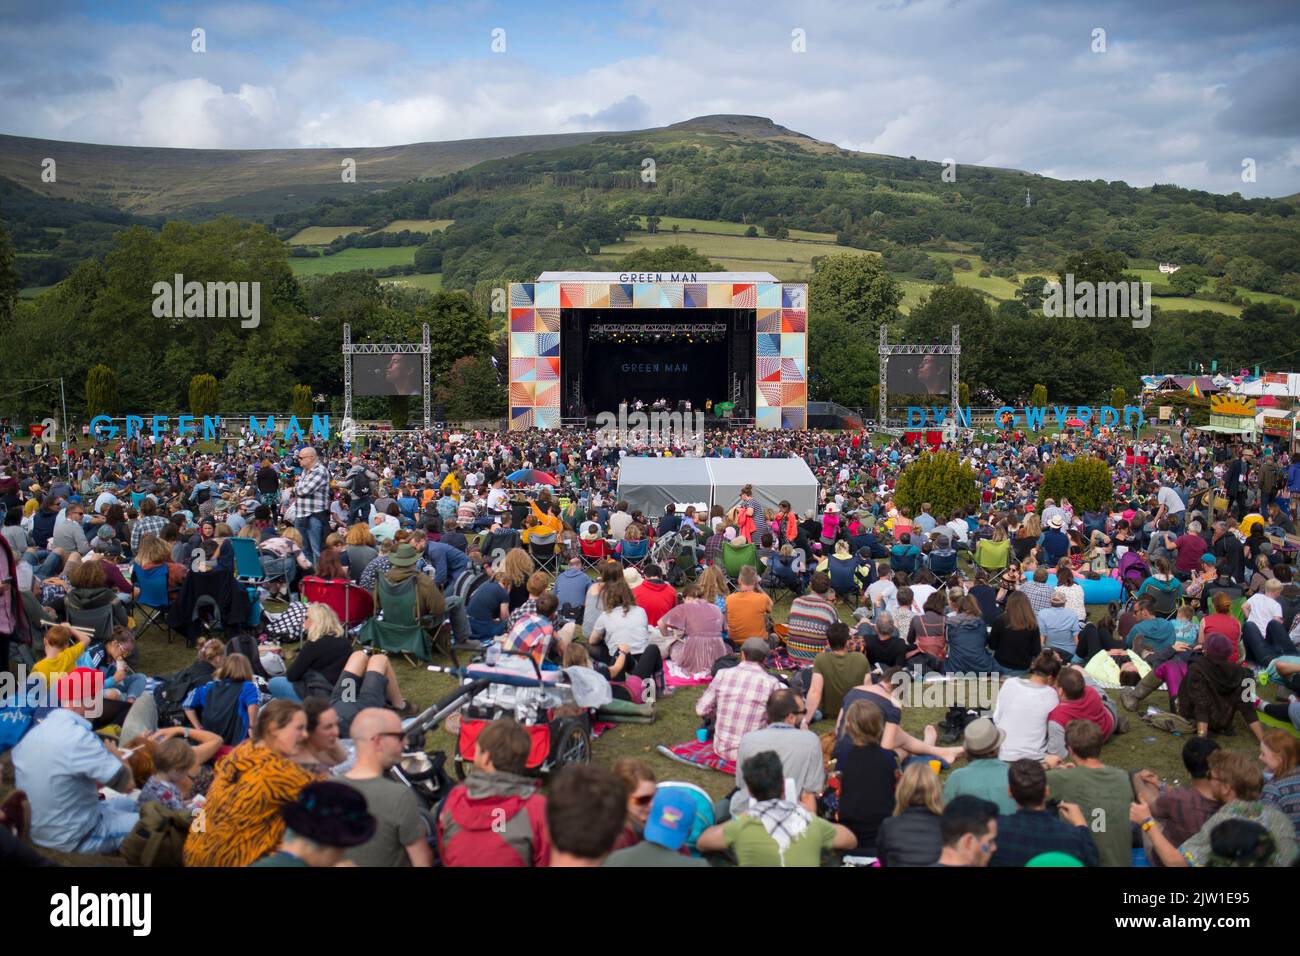 A general view of the main stage at the Green Man festival in Crickhowell, Wales, United Kingdom. Stock Photo